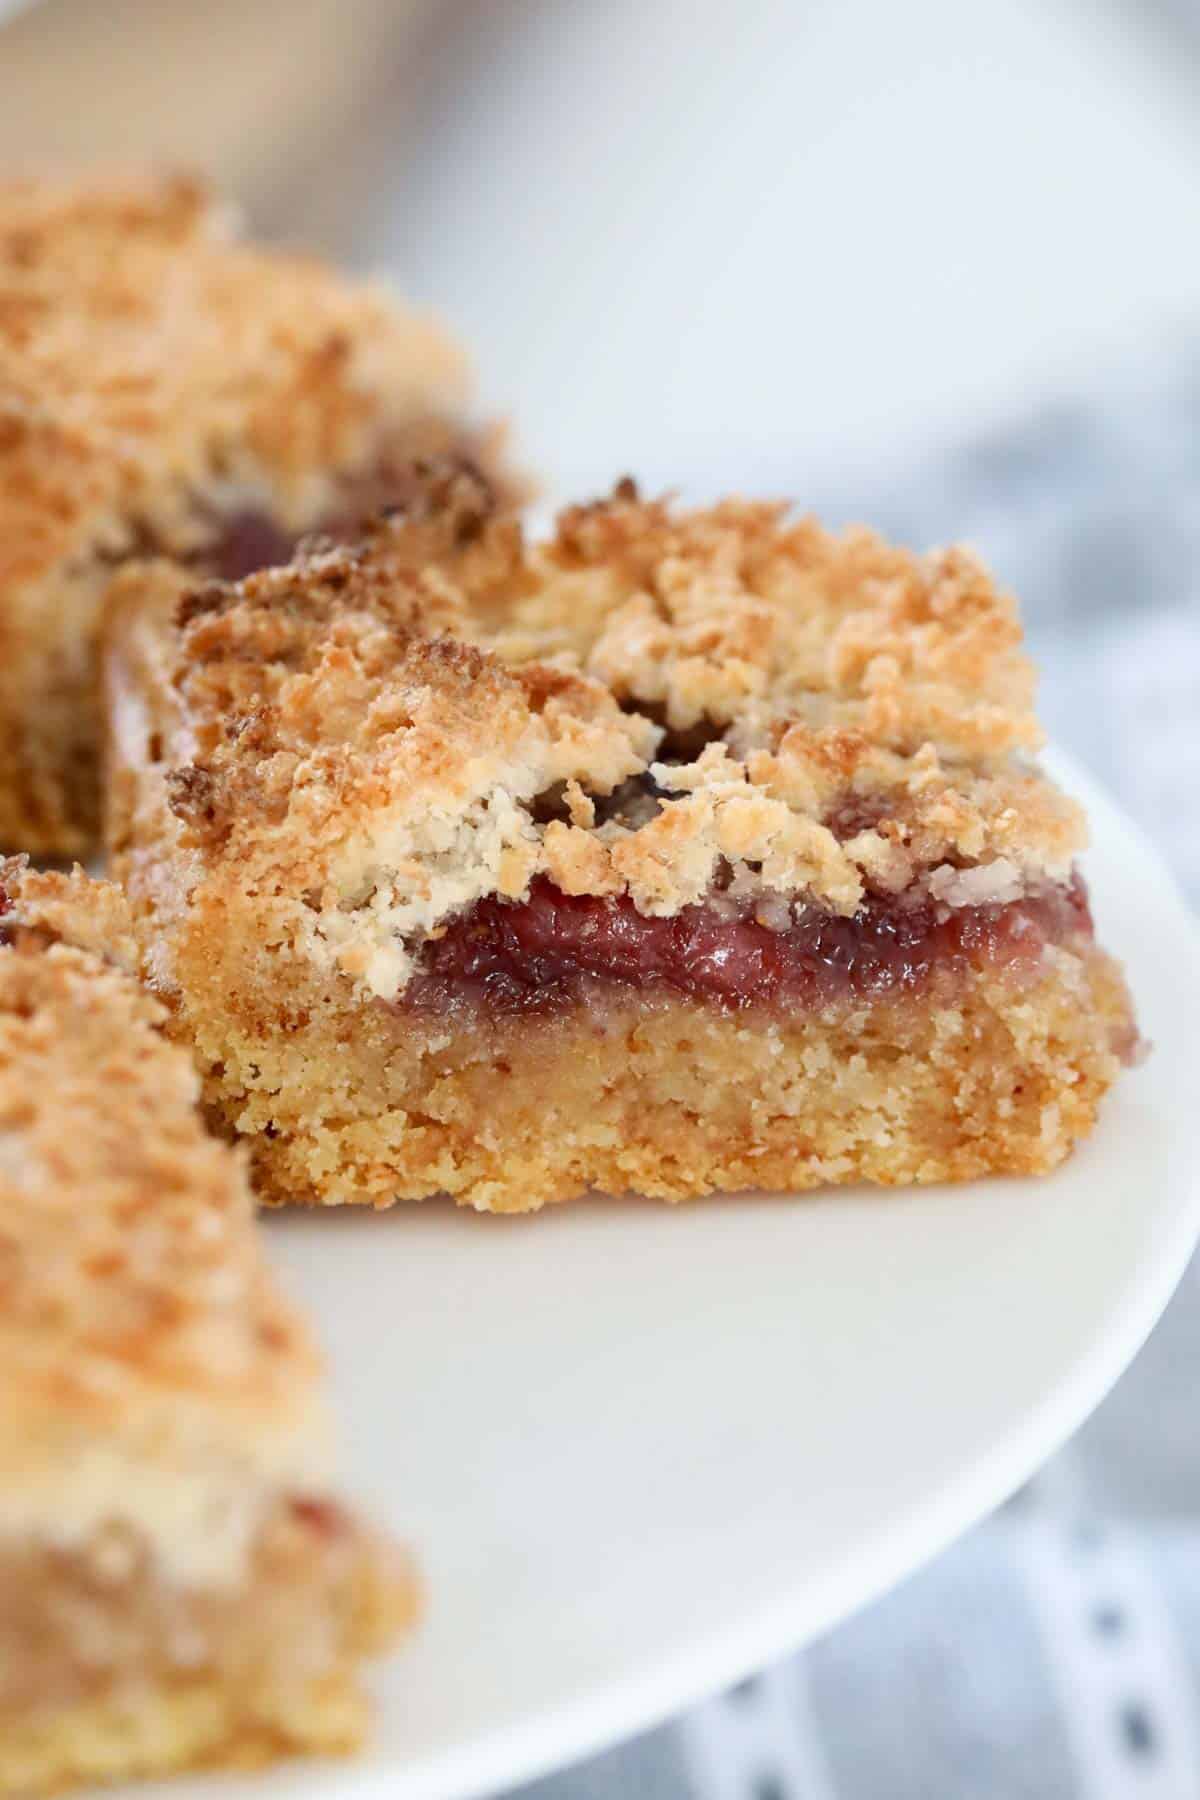 A baked jam slice with a coconut topping.